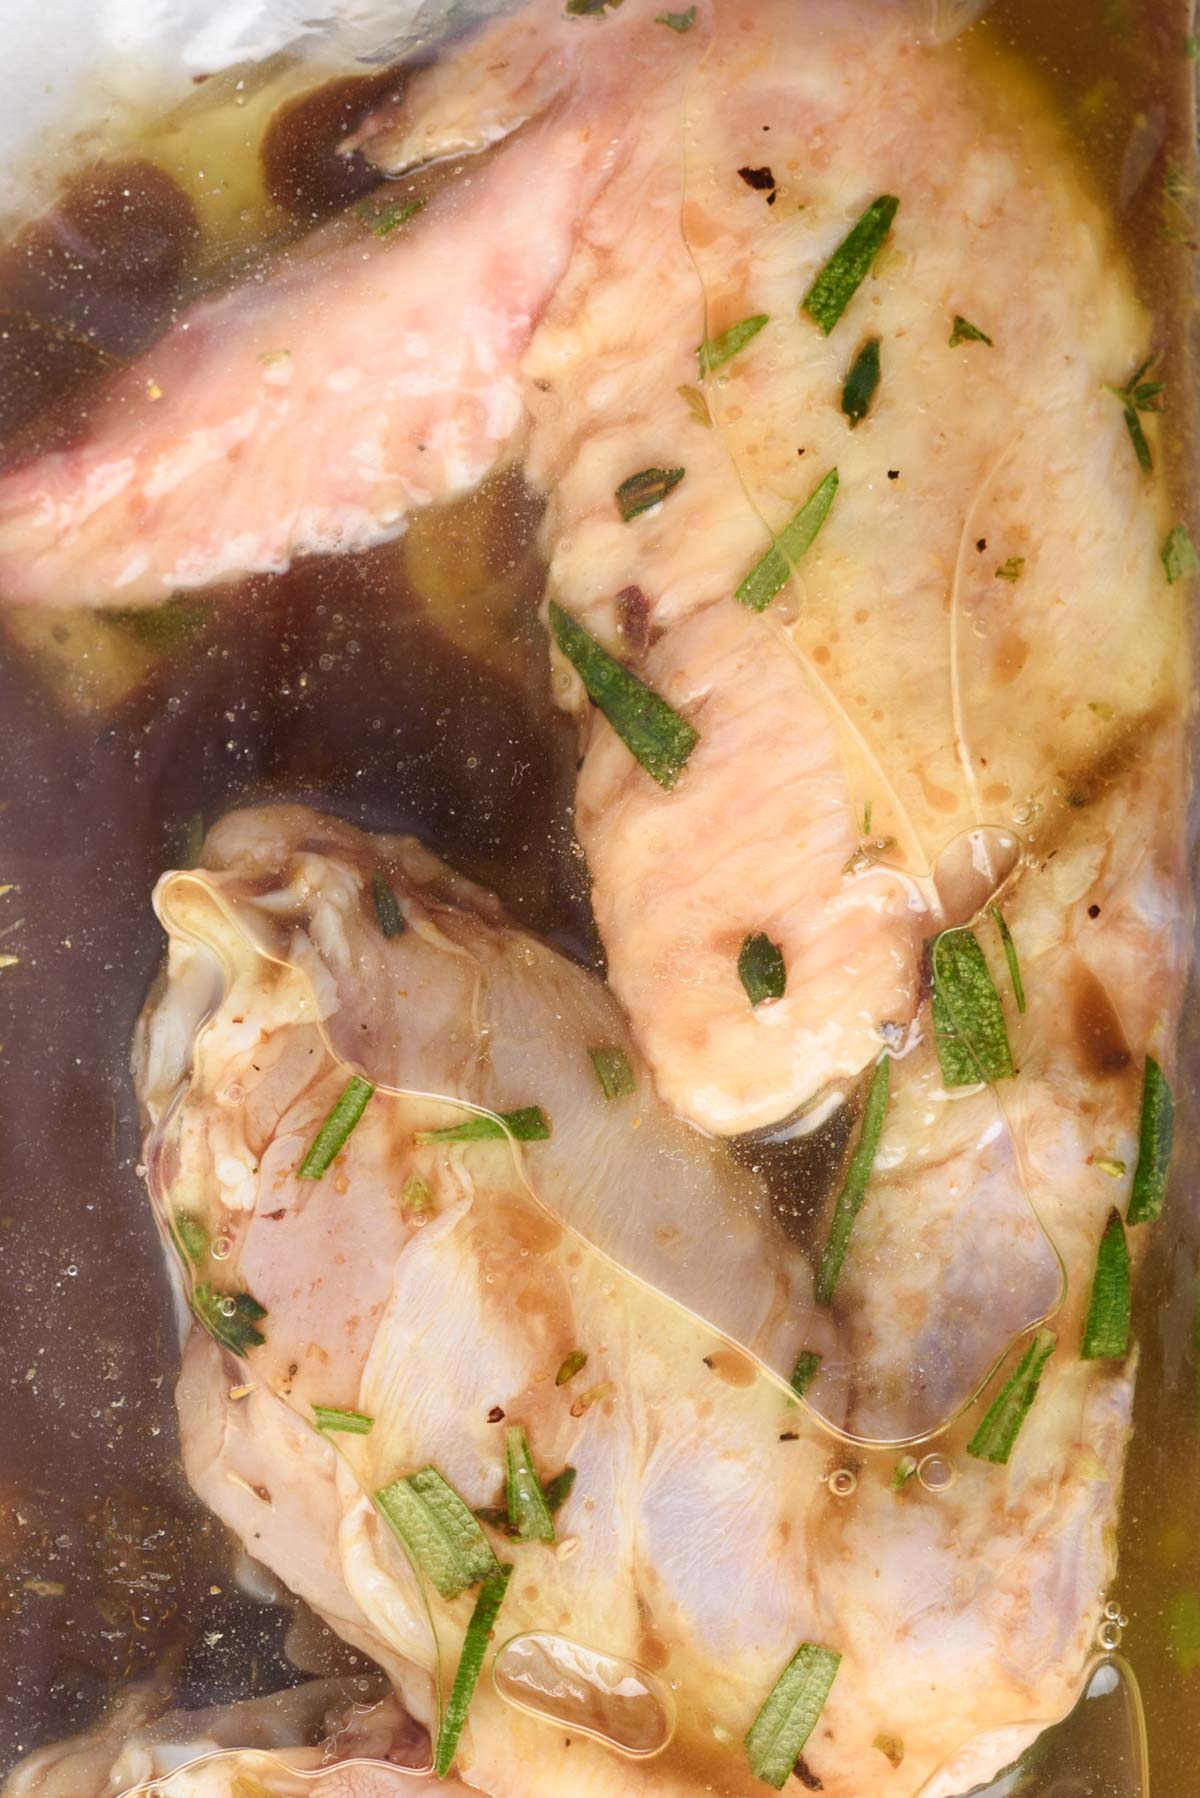 close up view of the marinade and two chicken wings in a ziptop bag